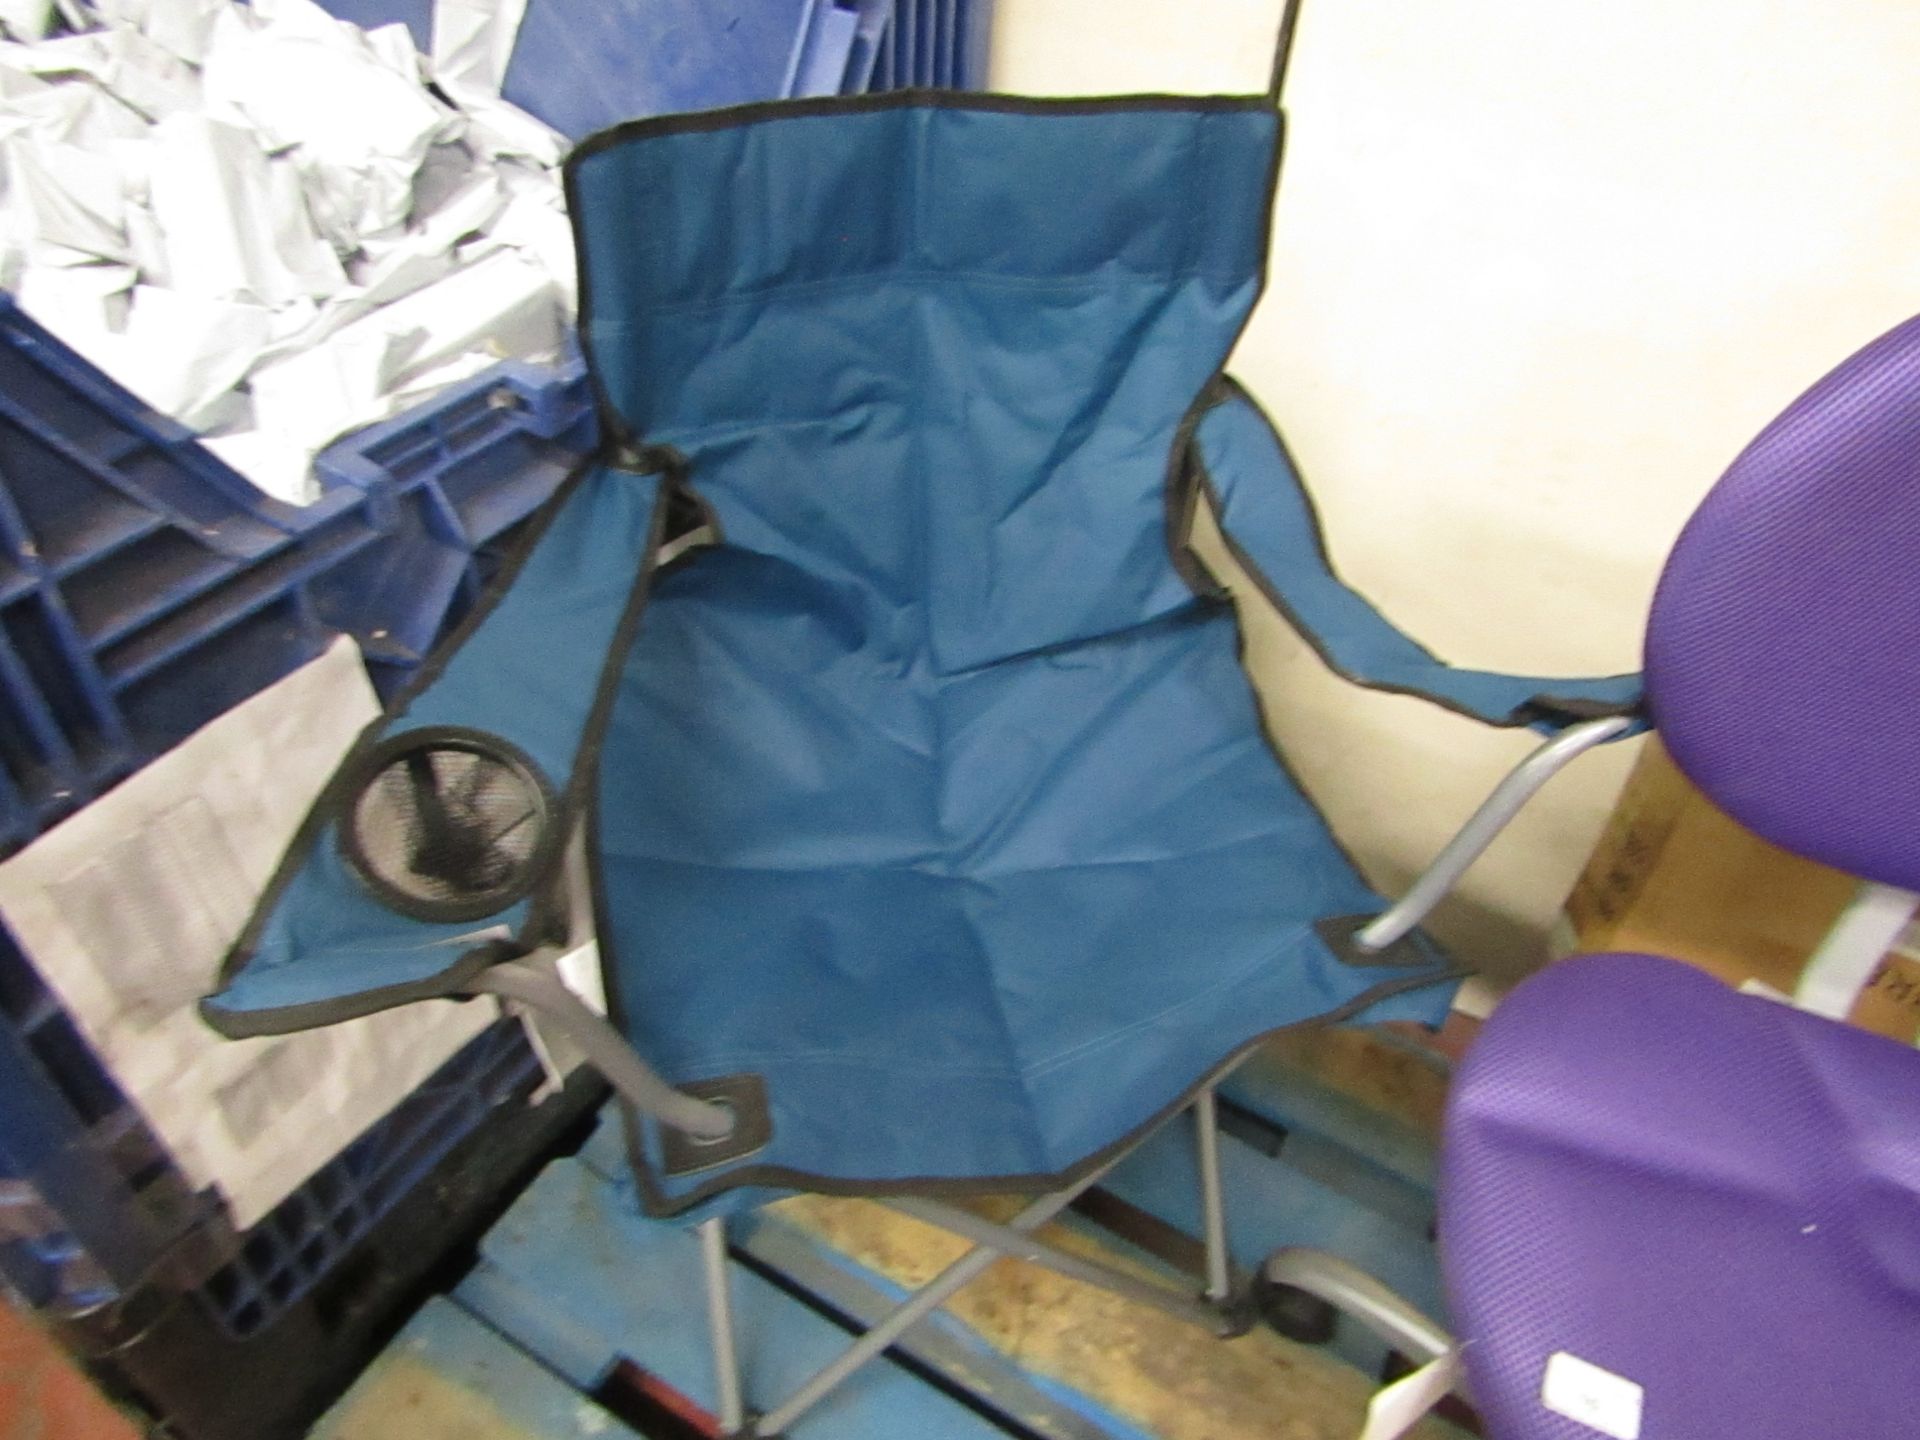 Foldaway Camping chair with drinks holder in carry bag